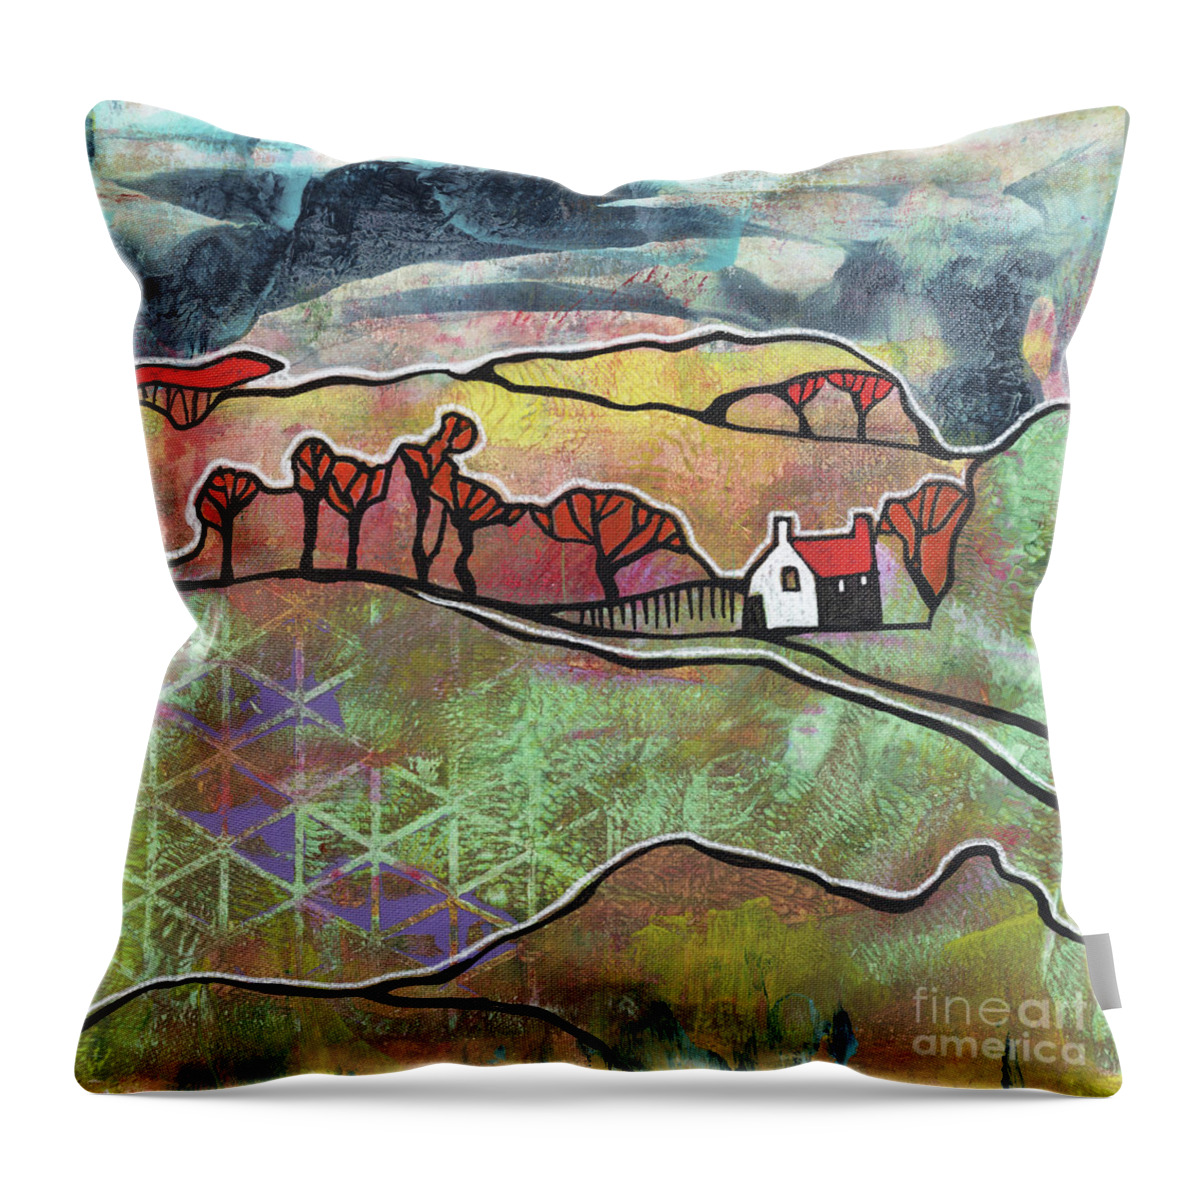  Acrylic Throw Pillow featuring the painting Seasonal Landscape - Autumn #1 by Ariadna De Raadt